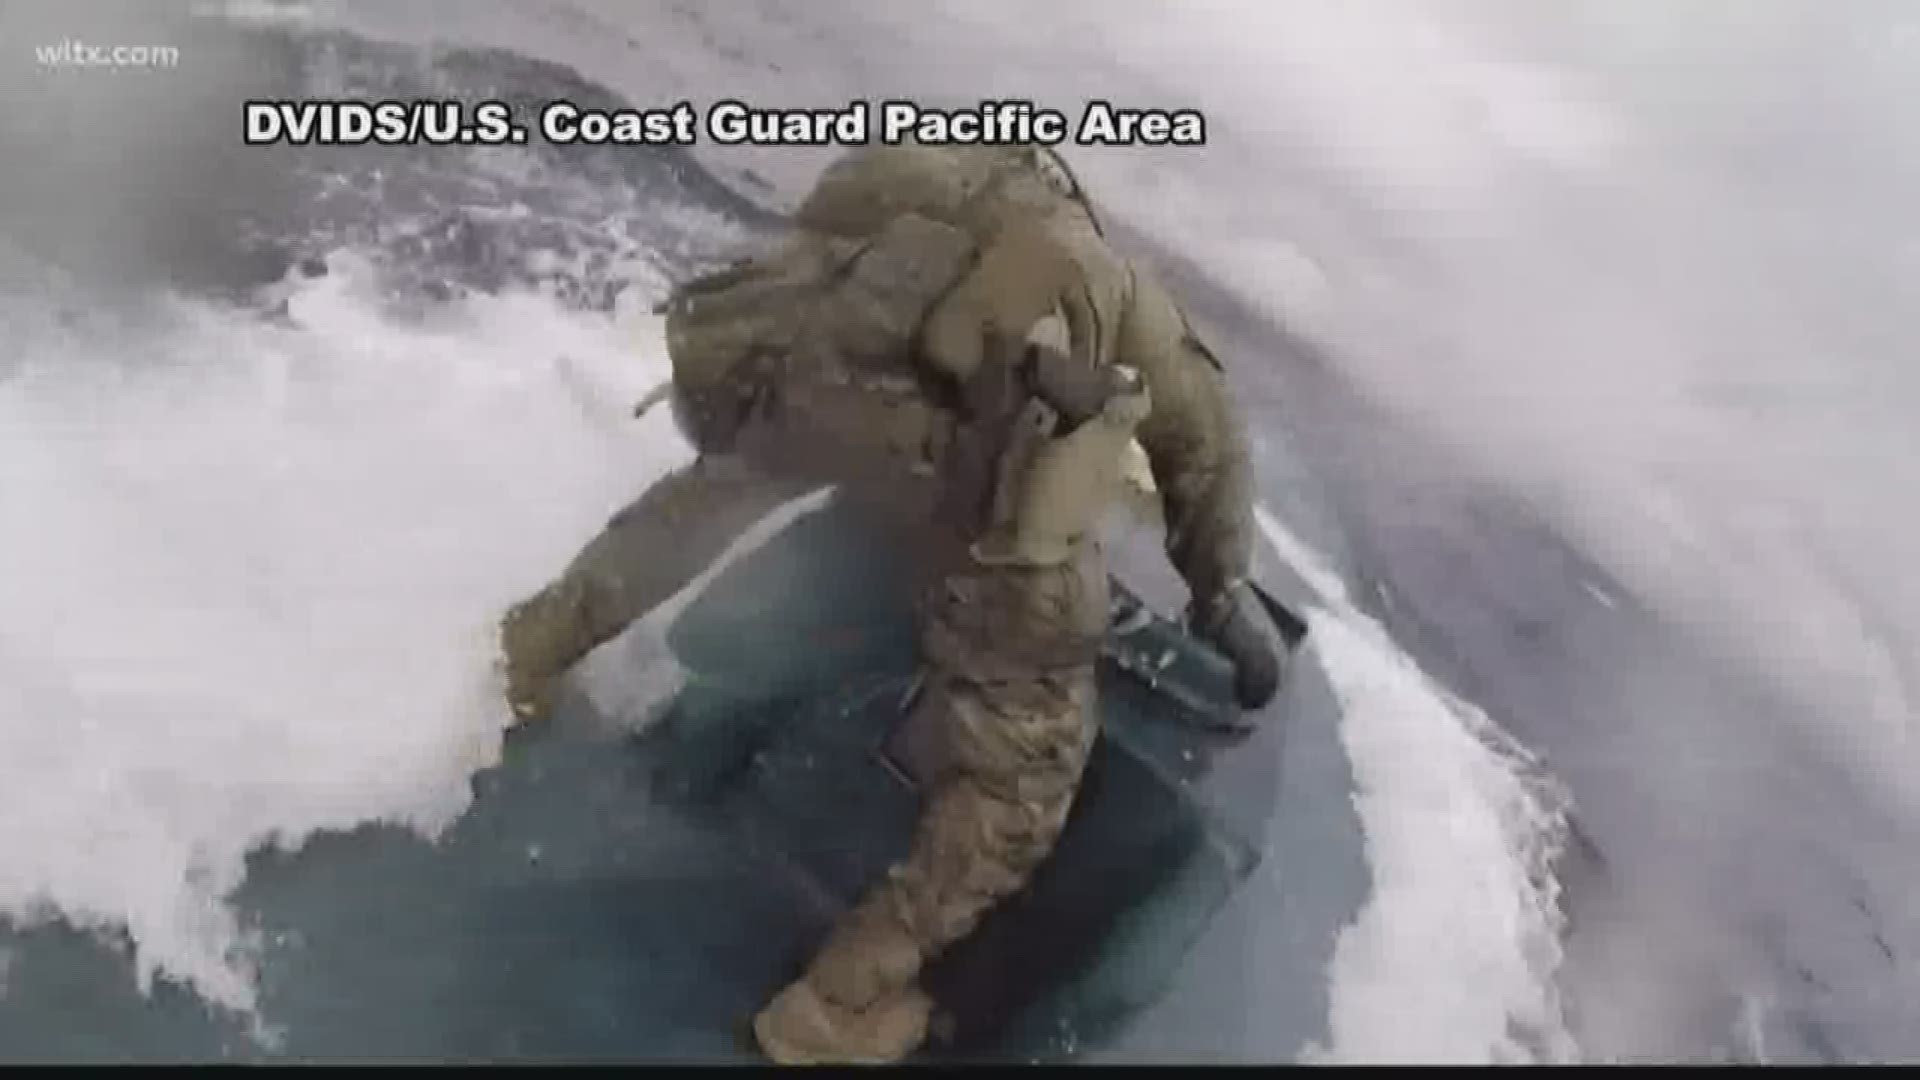 Wild, stunning video from the U.S. Coast Guard shows crew members board a vessel they suspected of smuggling drugs. In the dramatic, camera-captured scene, crew members of the Coast Guard Cutter Munro intercept what they called "a self-propelled semi-submersible."